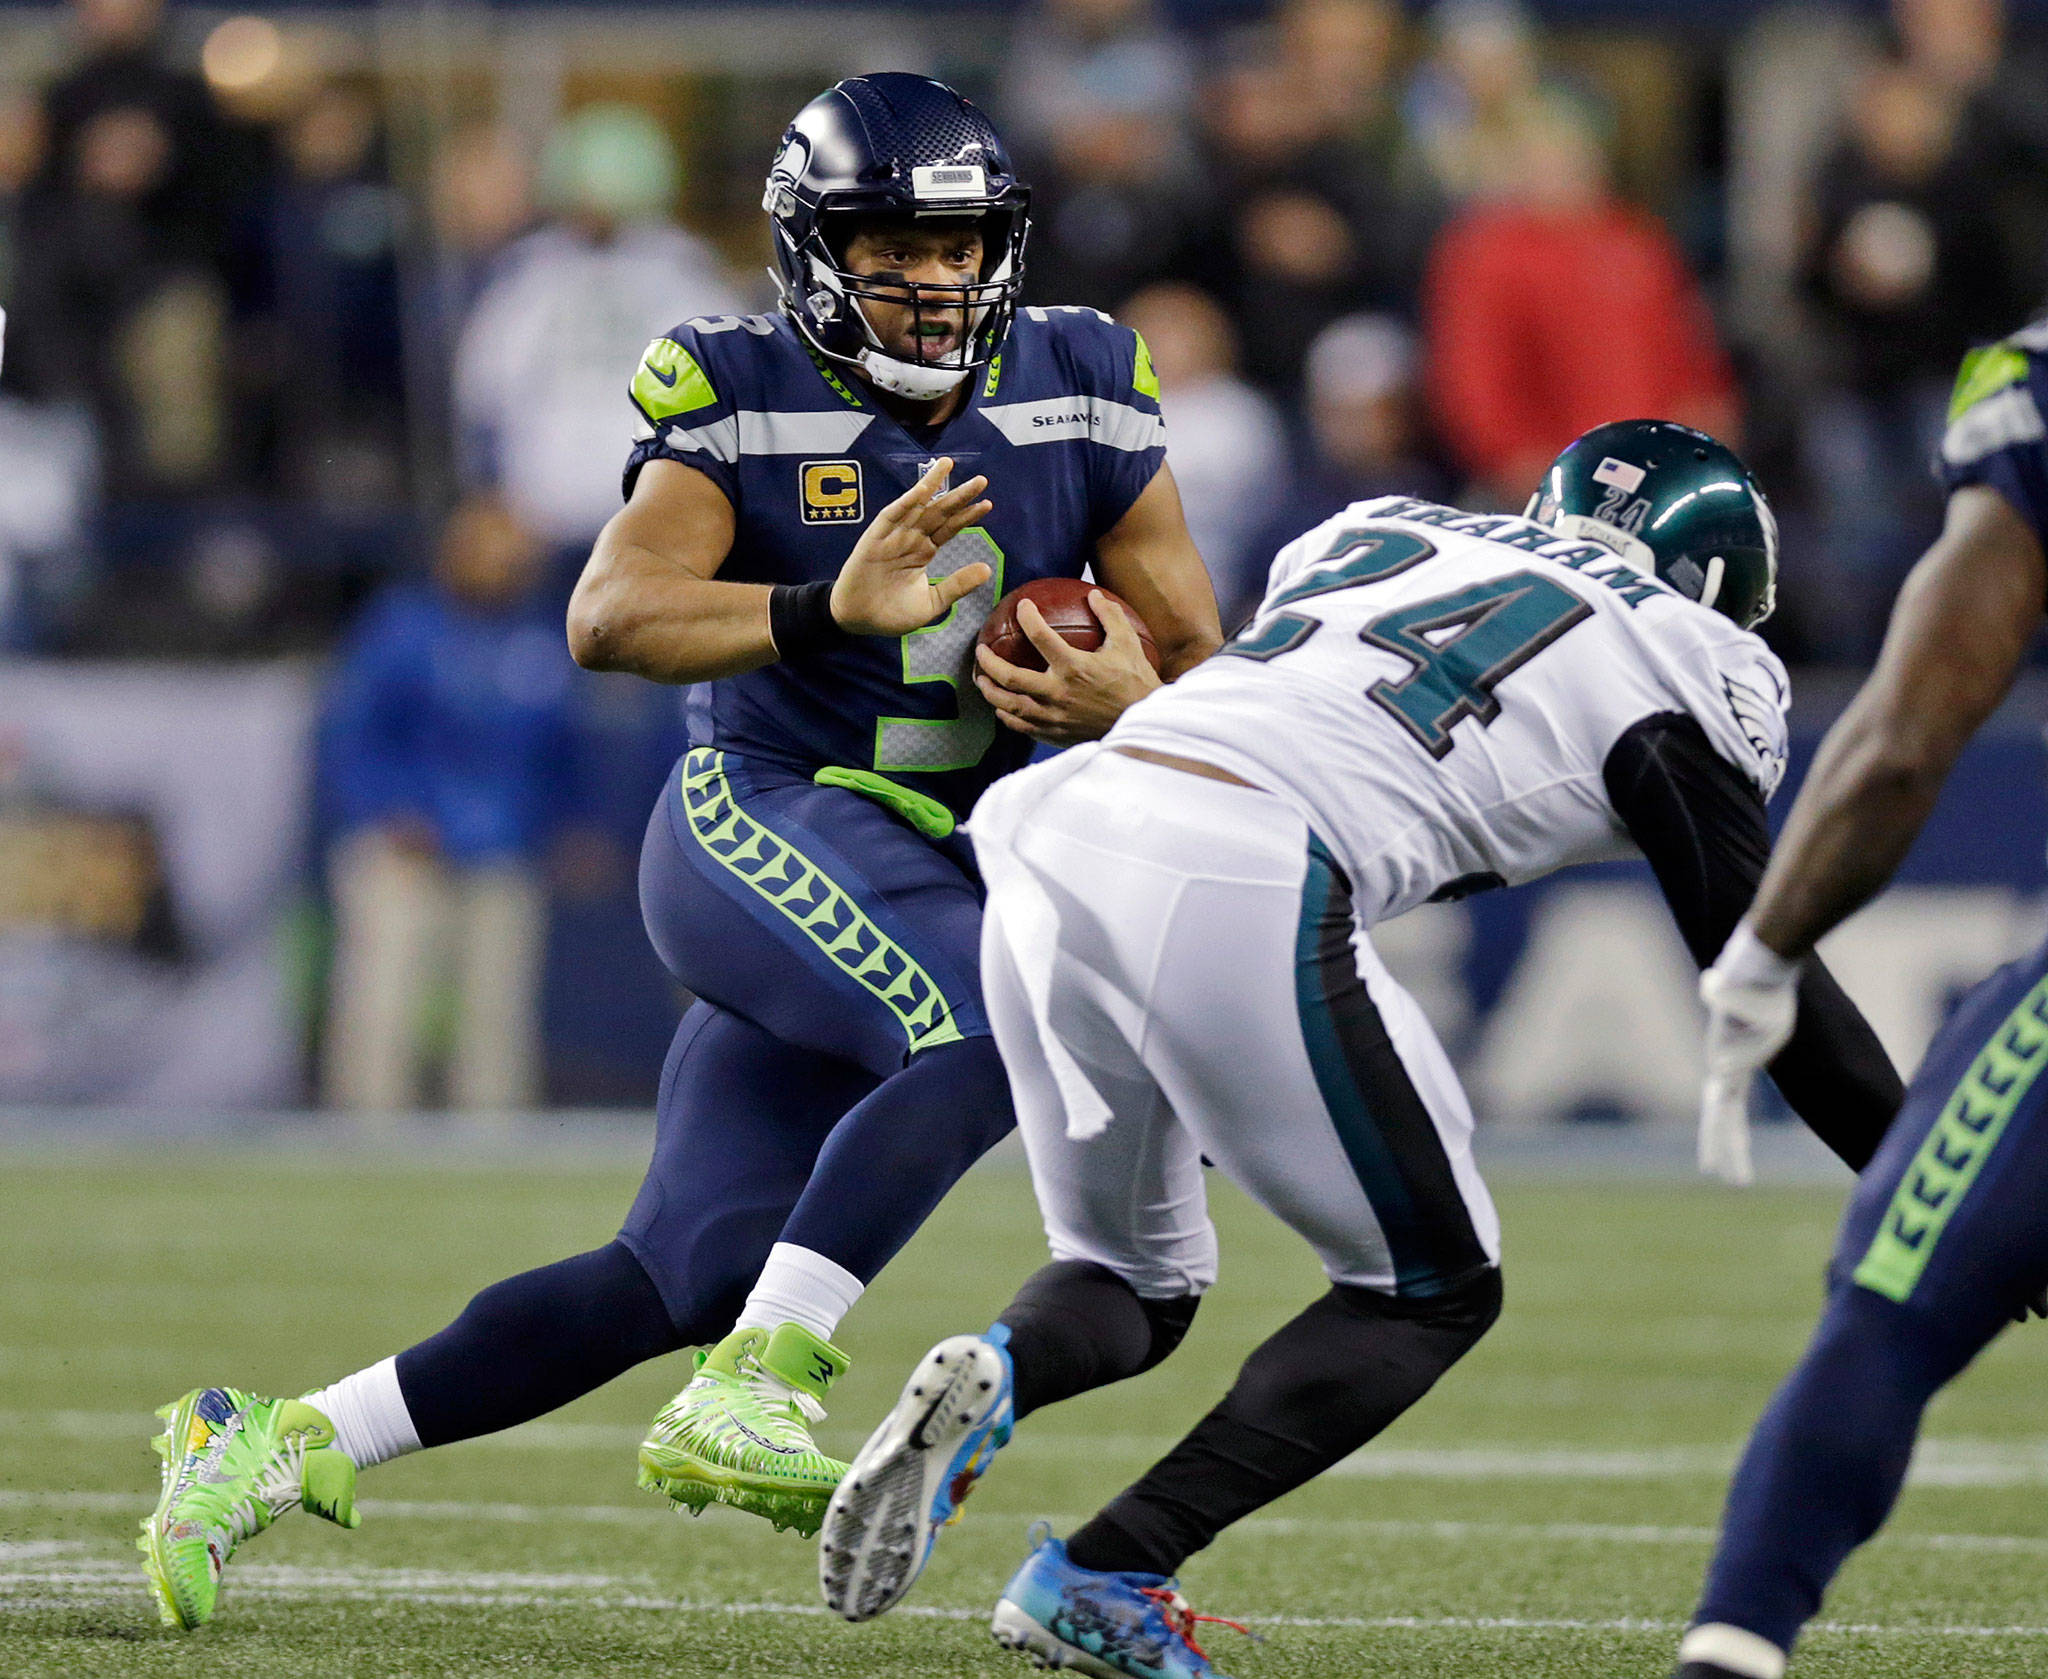 Seahawks quarterback Russell Wilson (left) scrambles as the Eagles’ Corey Graham (24) closes in during the first half of a game Dec. 3, 2017, in Seattle. (AP Photo/John Froschauer)